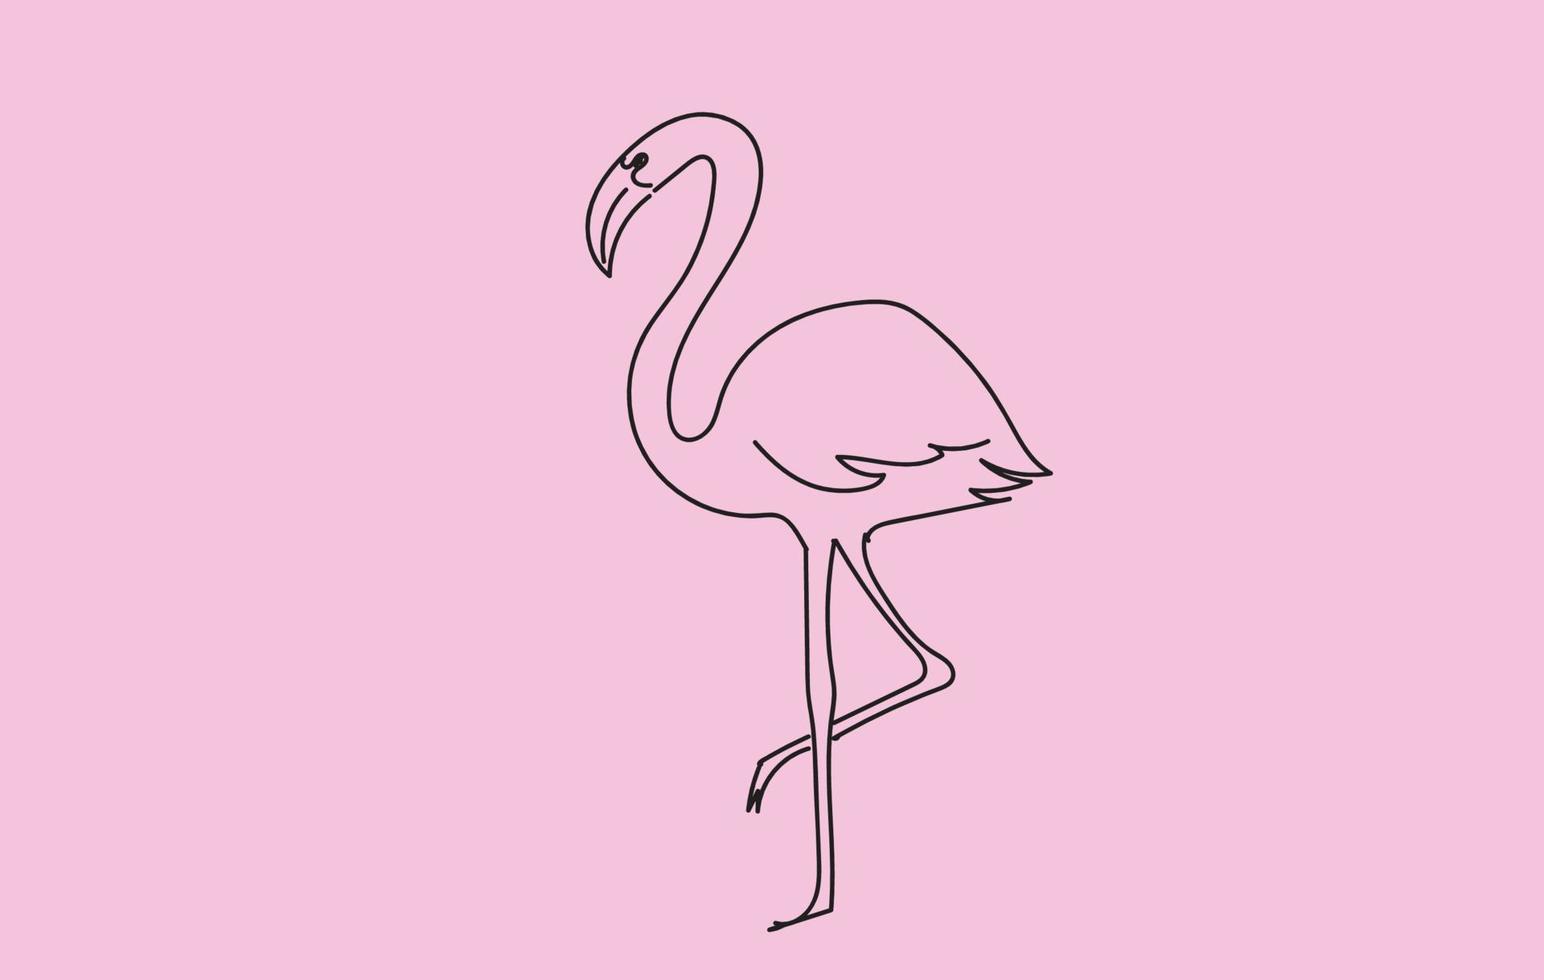 Flamingo Line Art Drawing on a Pink Background vector